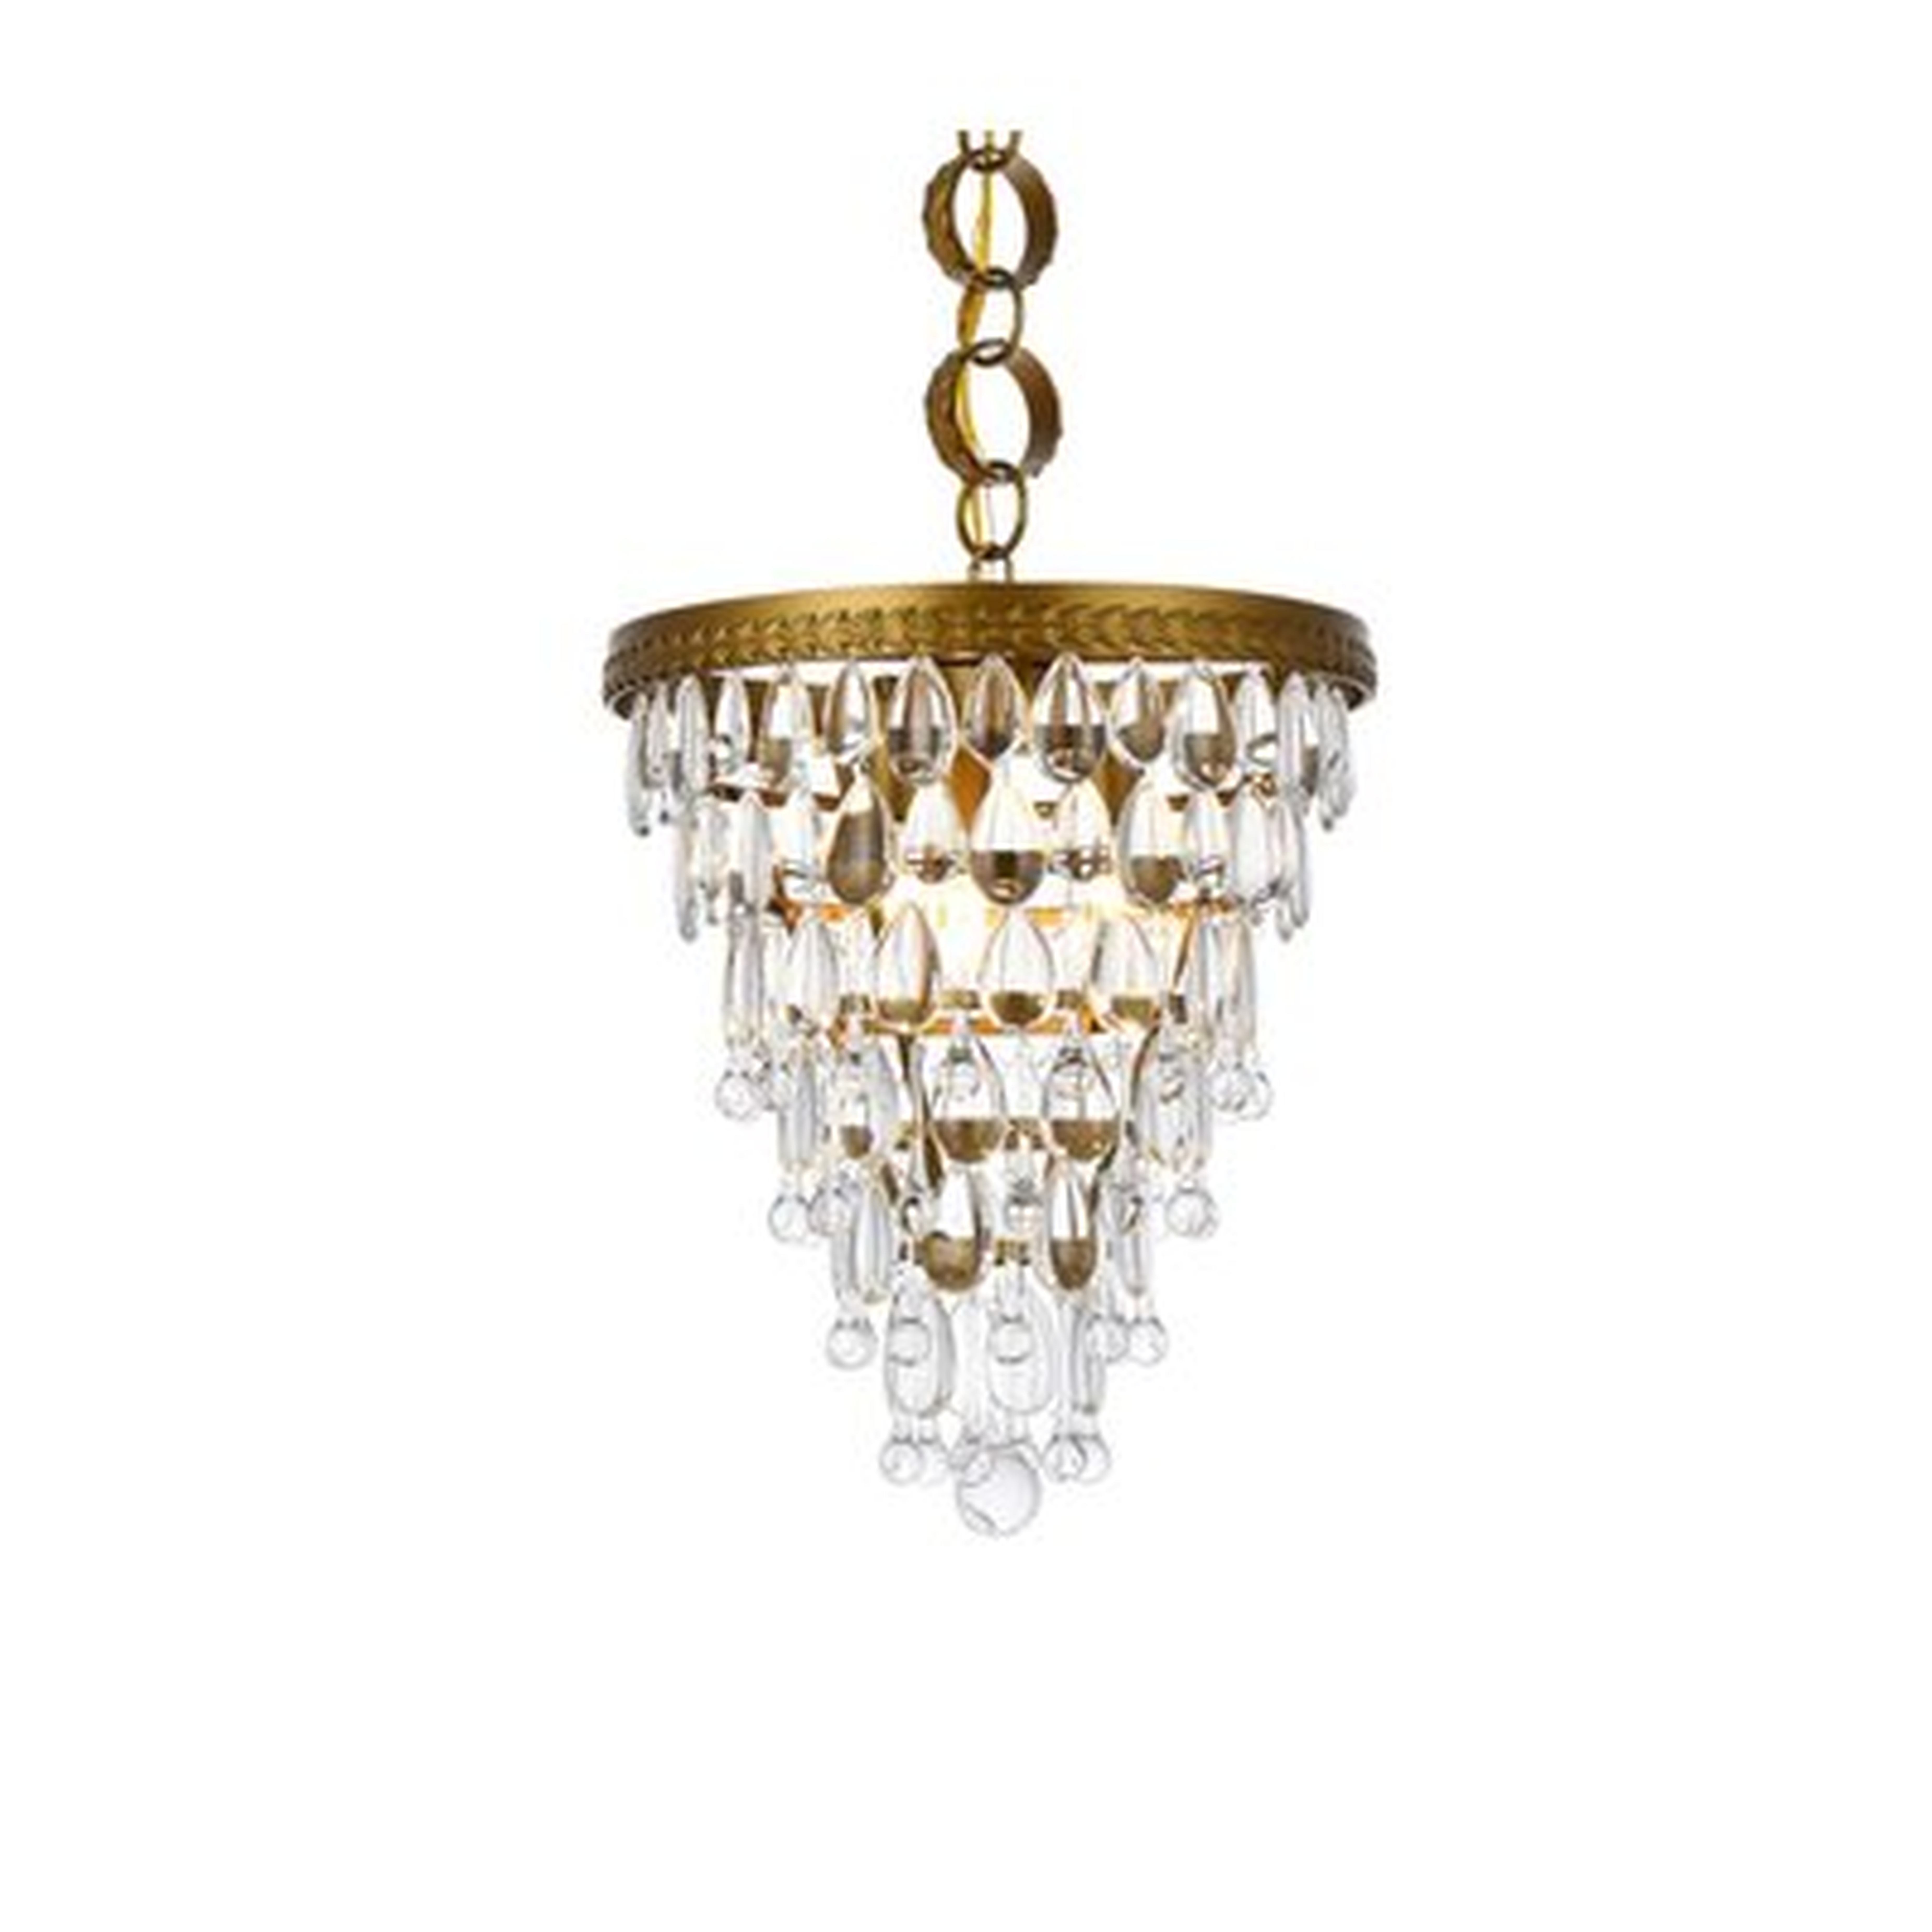 Rutha 3 - Light Unique / Statement Tiered Chandelier with Crystal Accents - Wayfair